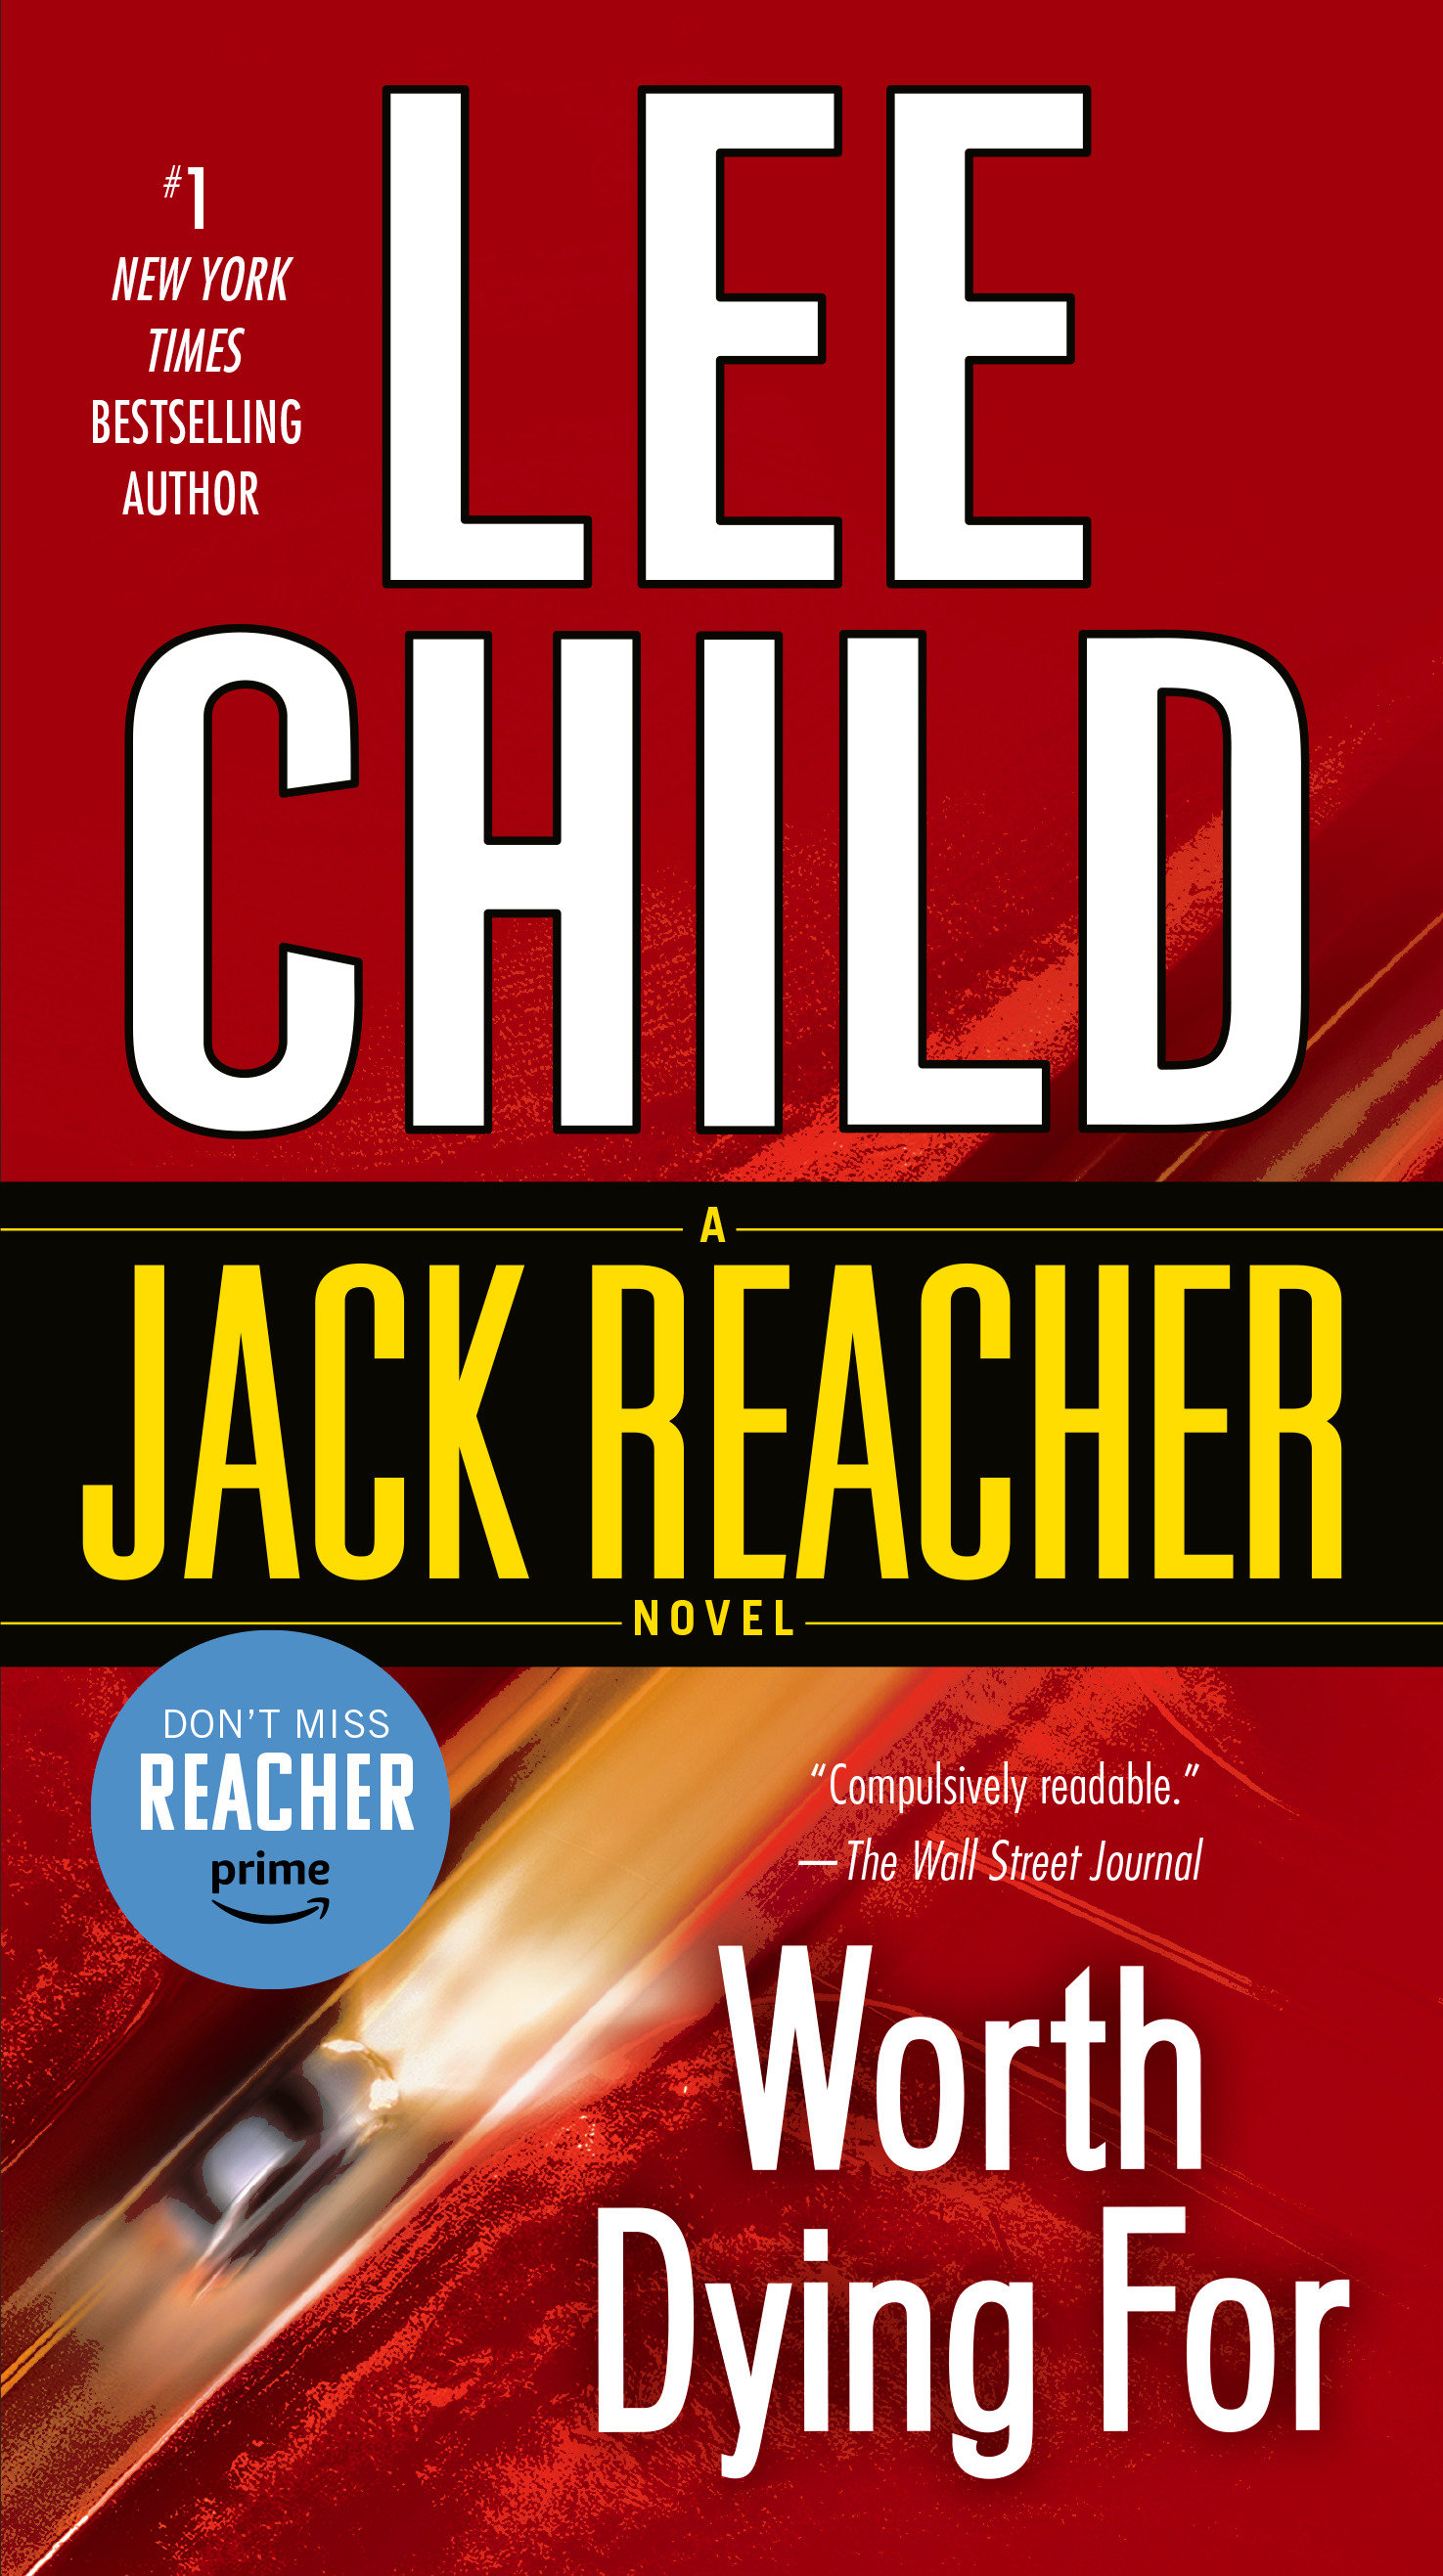 Worth dying for a Jack Reacher novel cover image